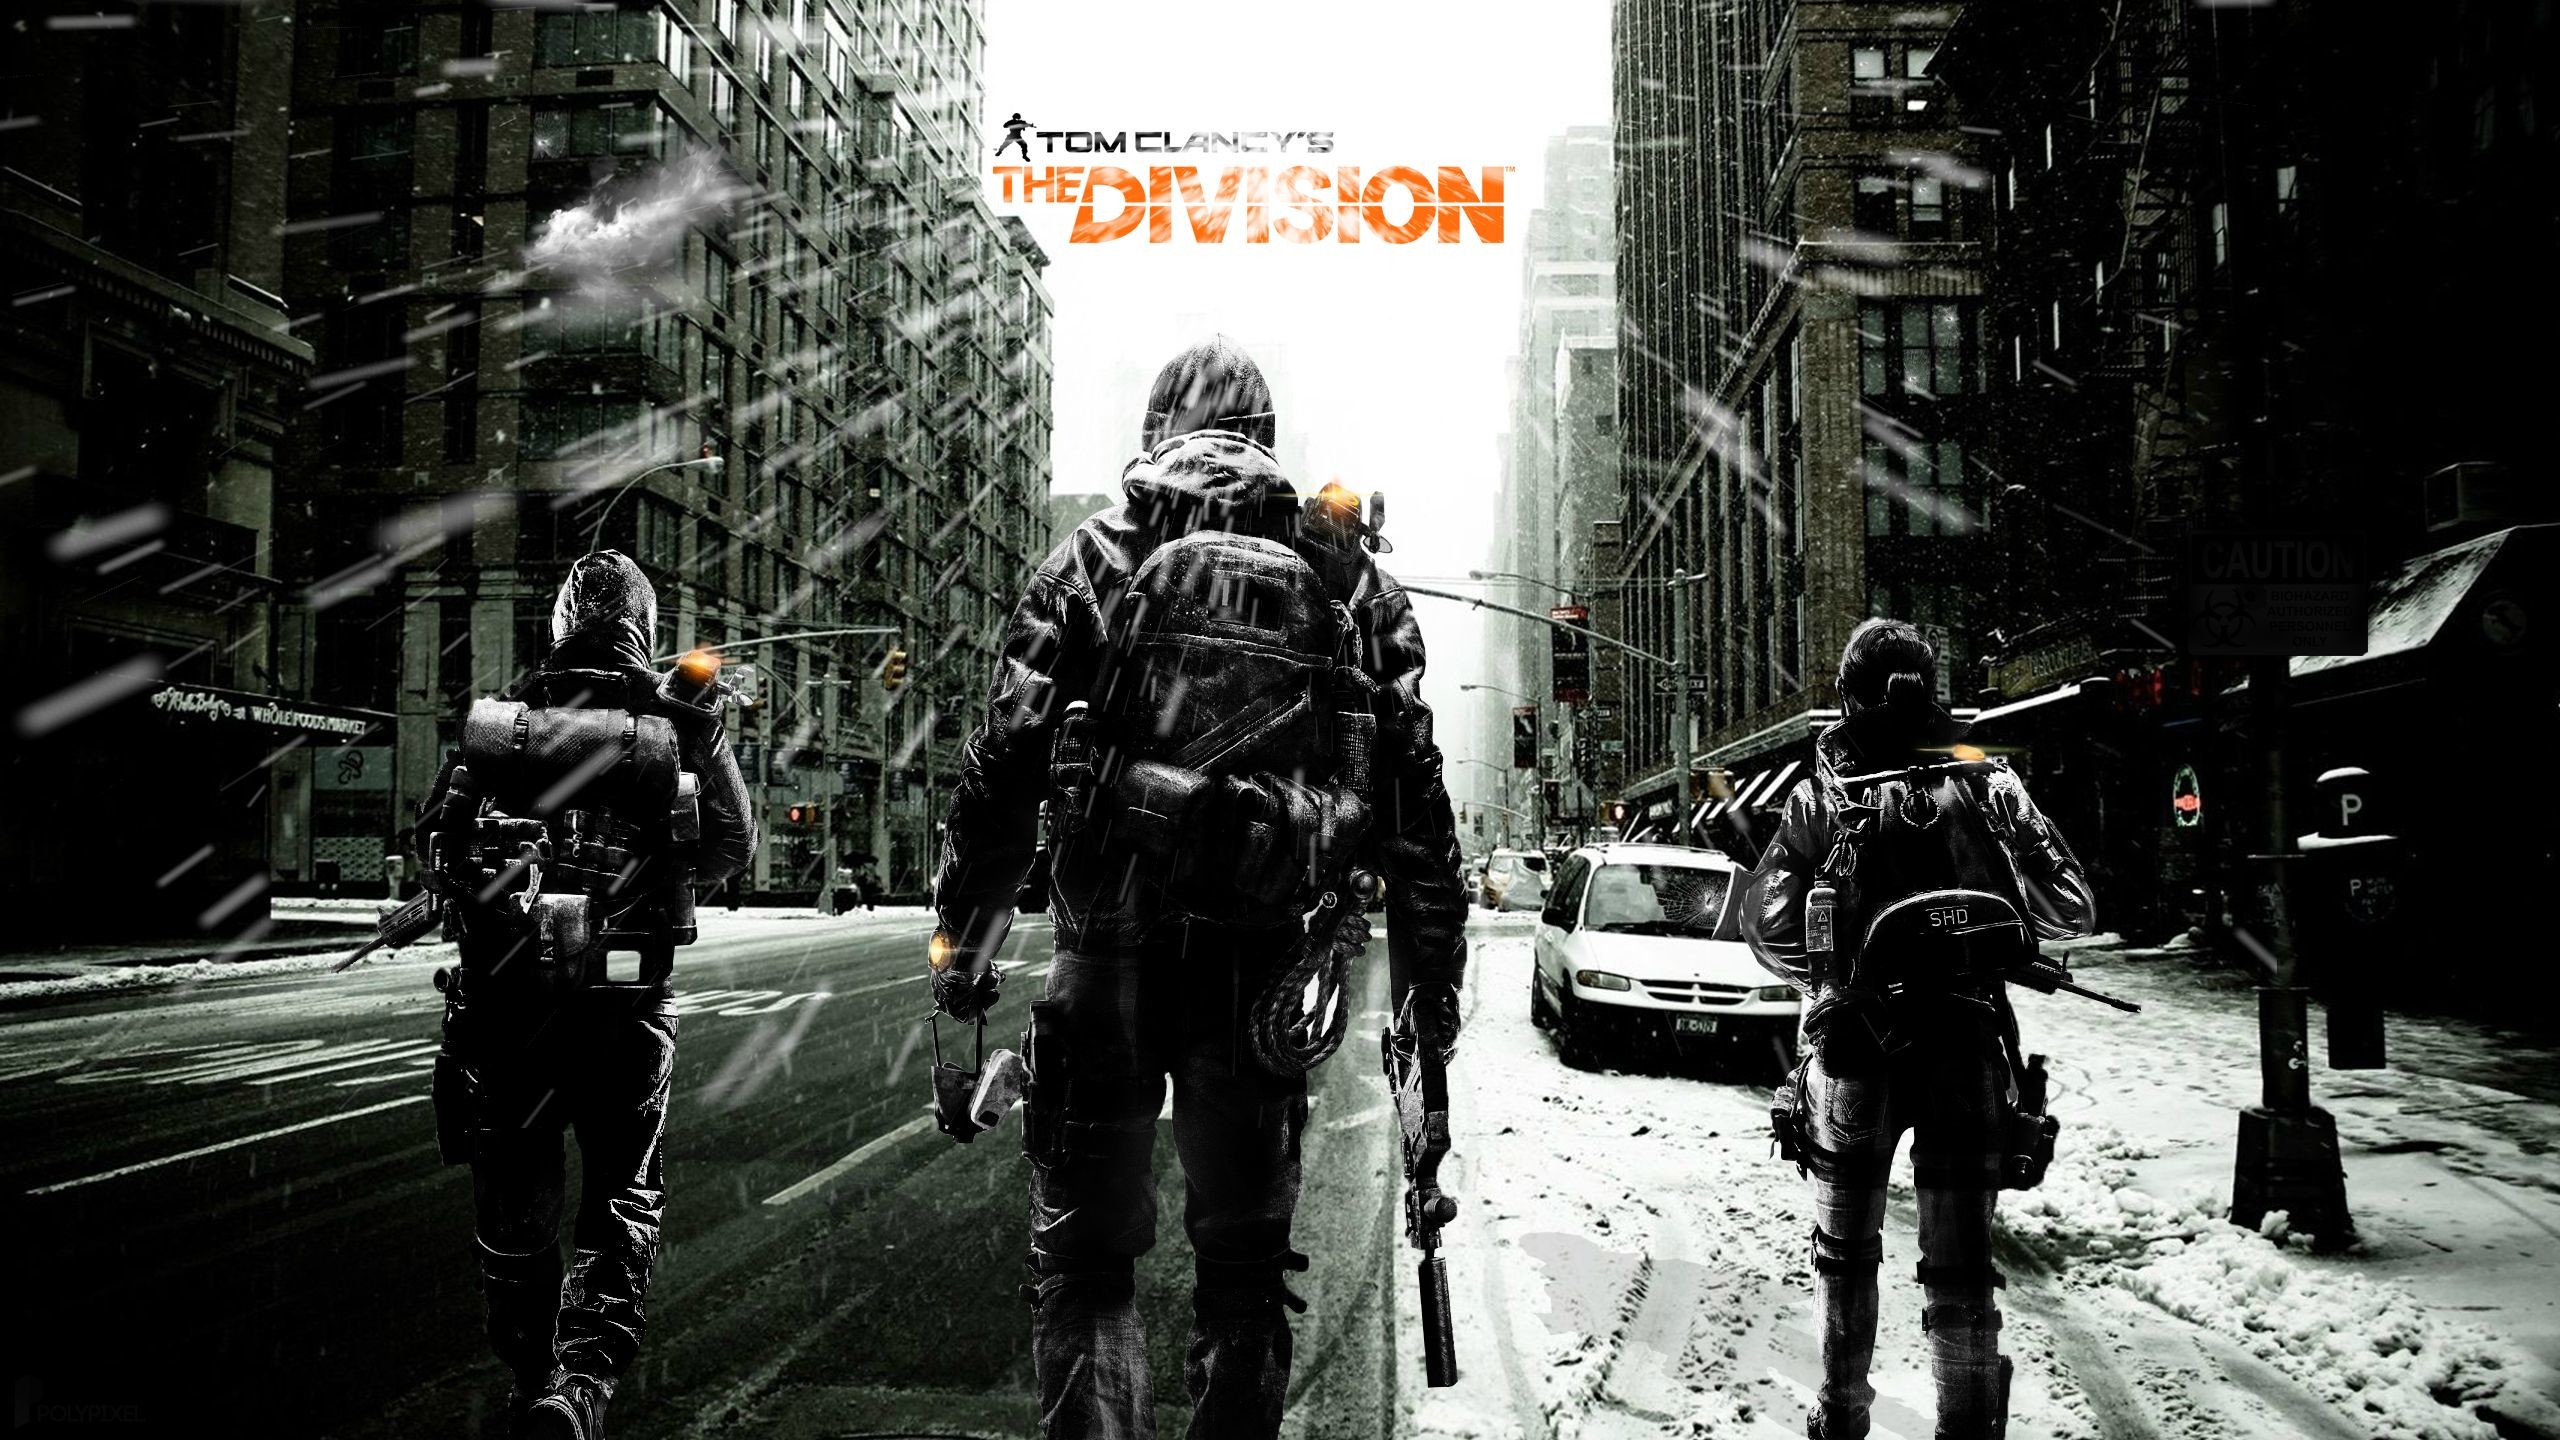 The Division Video Game Wallpaper The Division Wallpaper - Division Wallpaper Hd 1080p - HD Wallpaper 